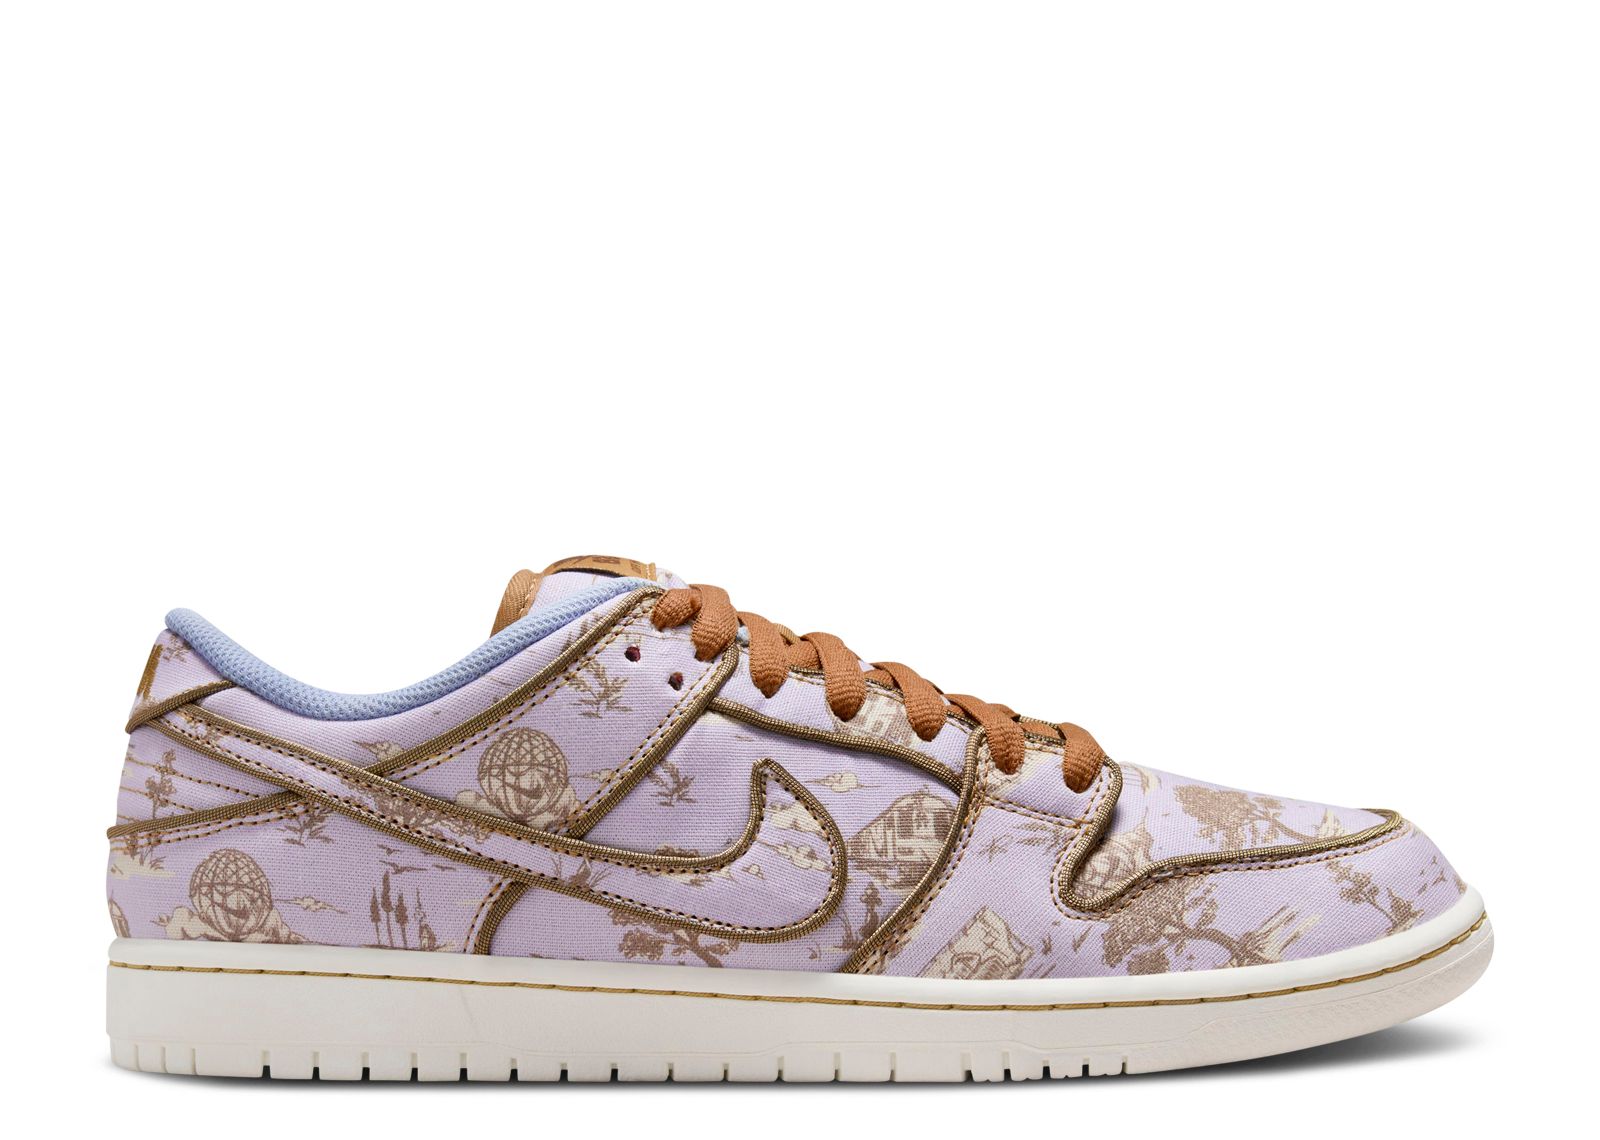 Dunk Low Premium SB 'City Of Style Pack' - Nike - FN5880 001 - football ...